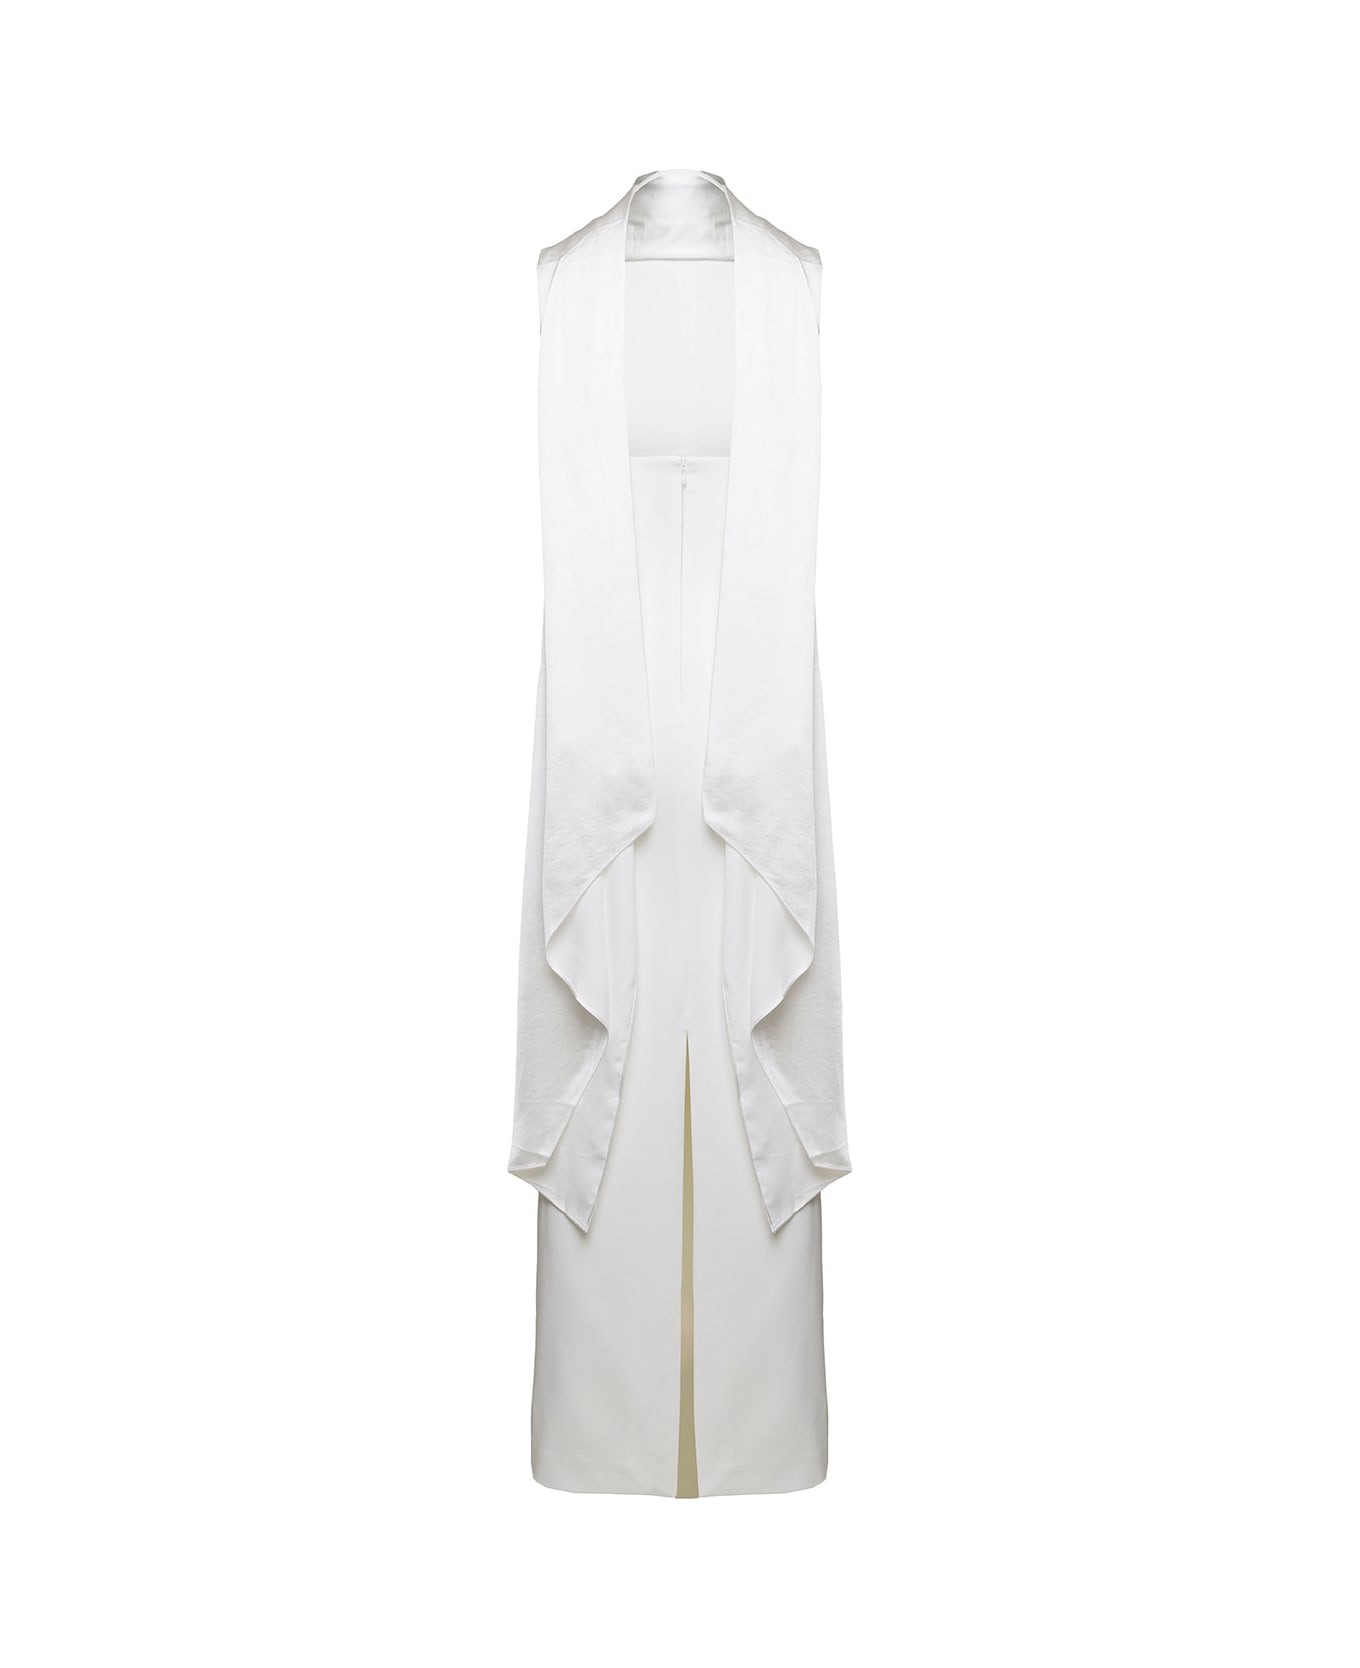 Solace London 'dahlia' Long White Dress With Halterneck In Stretch Fabric Woman - White